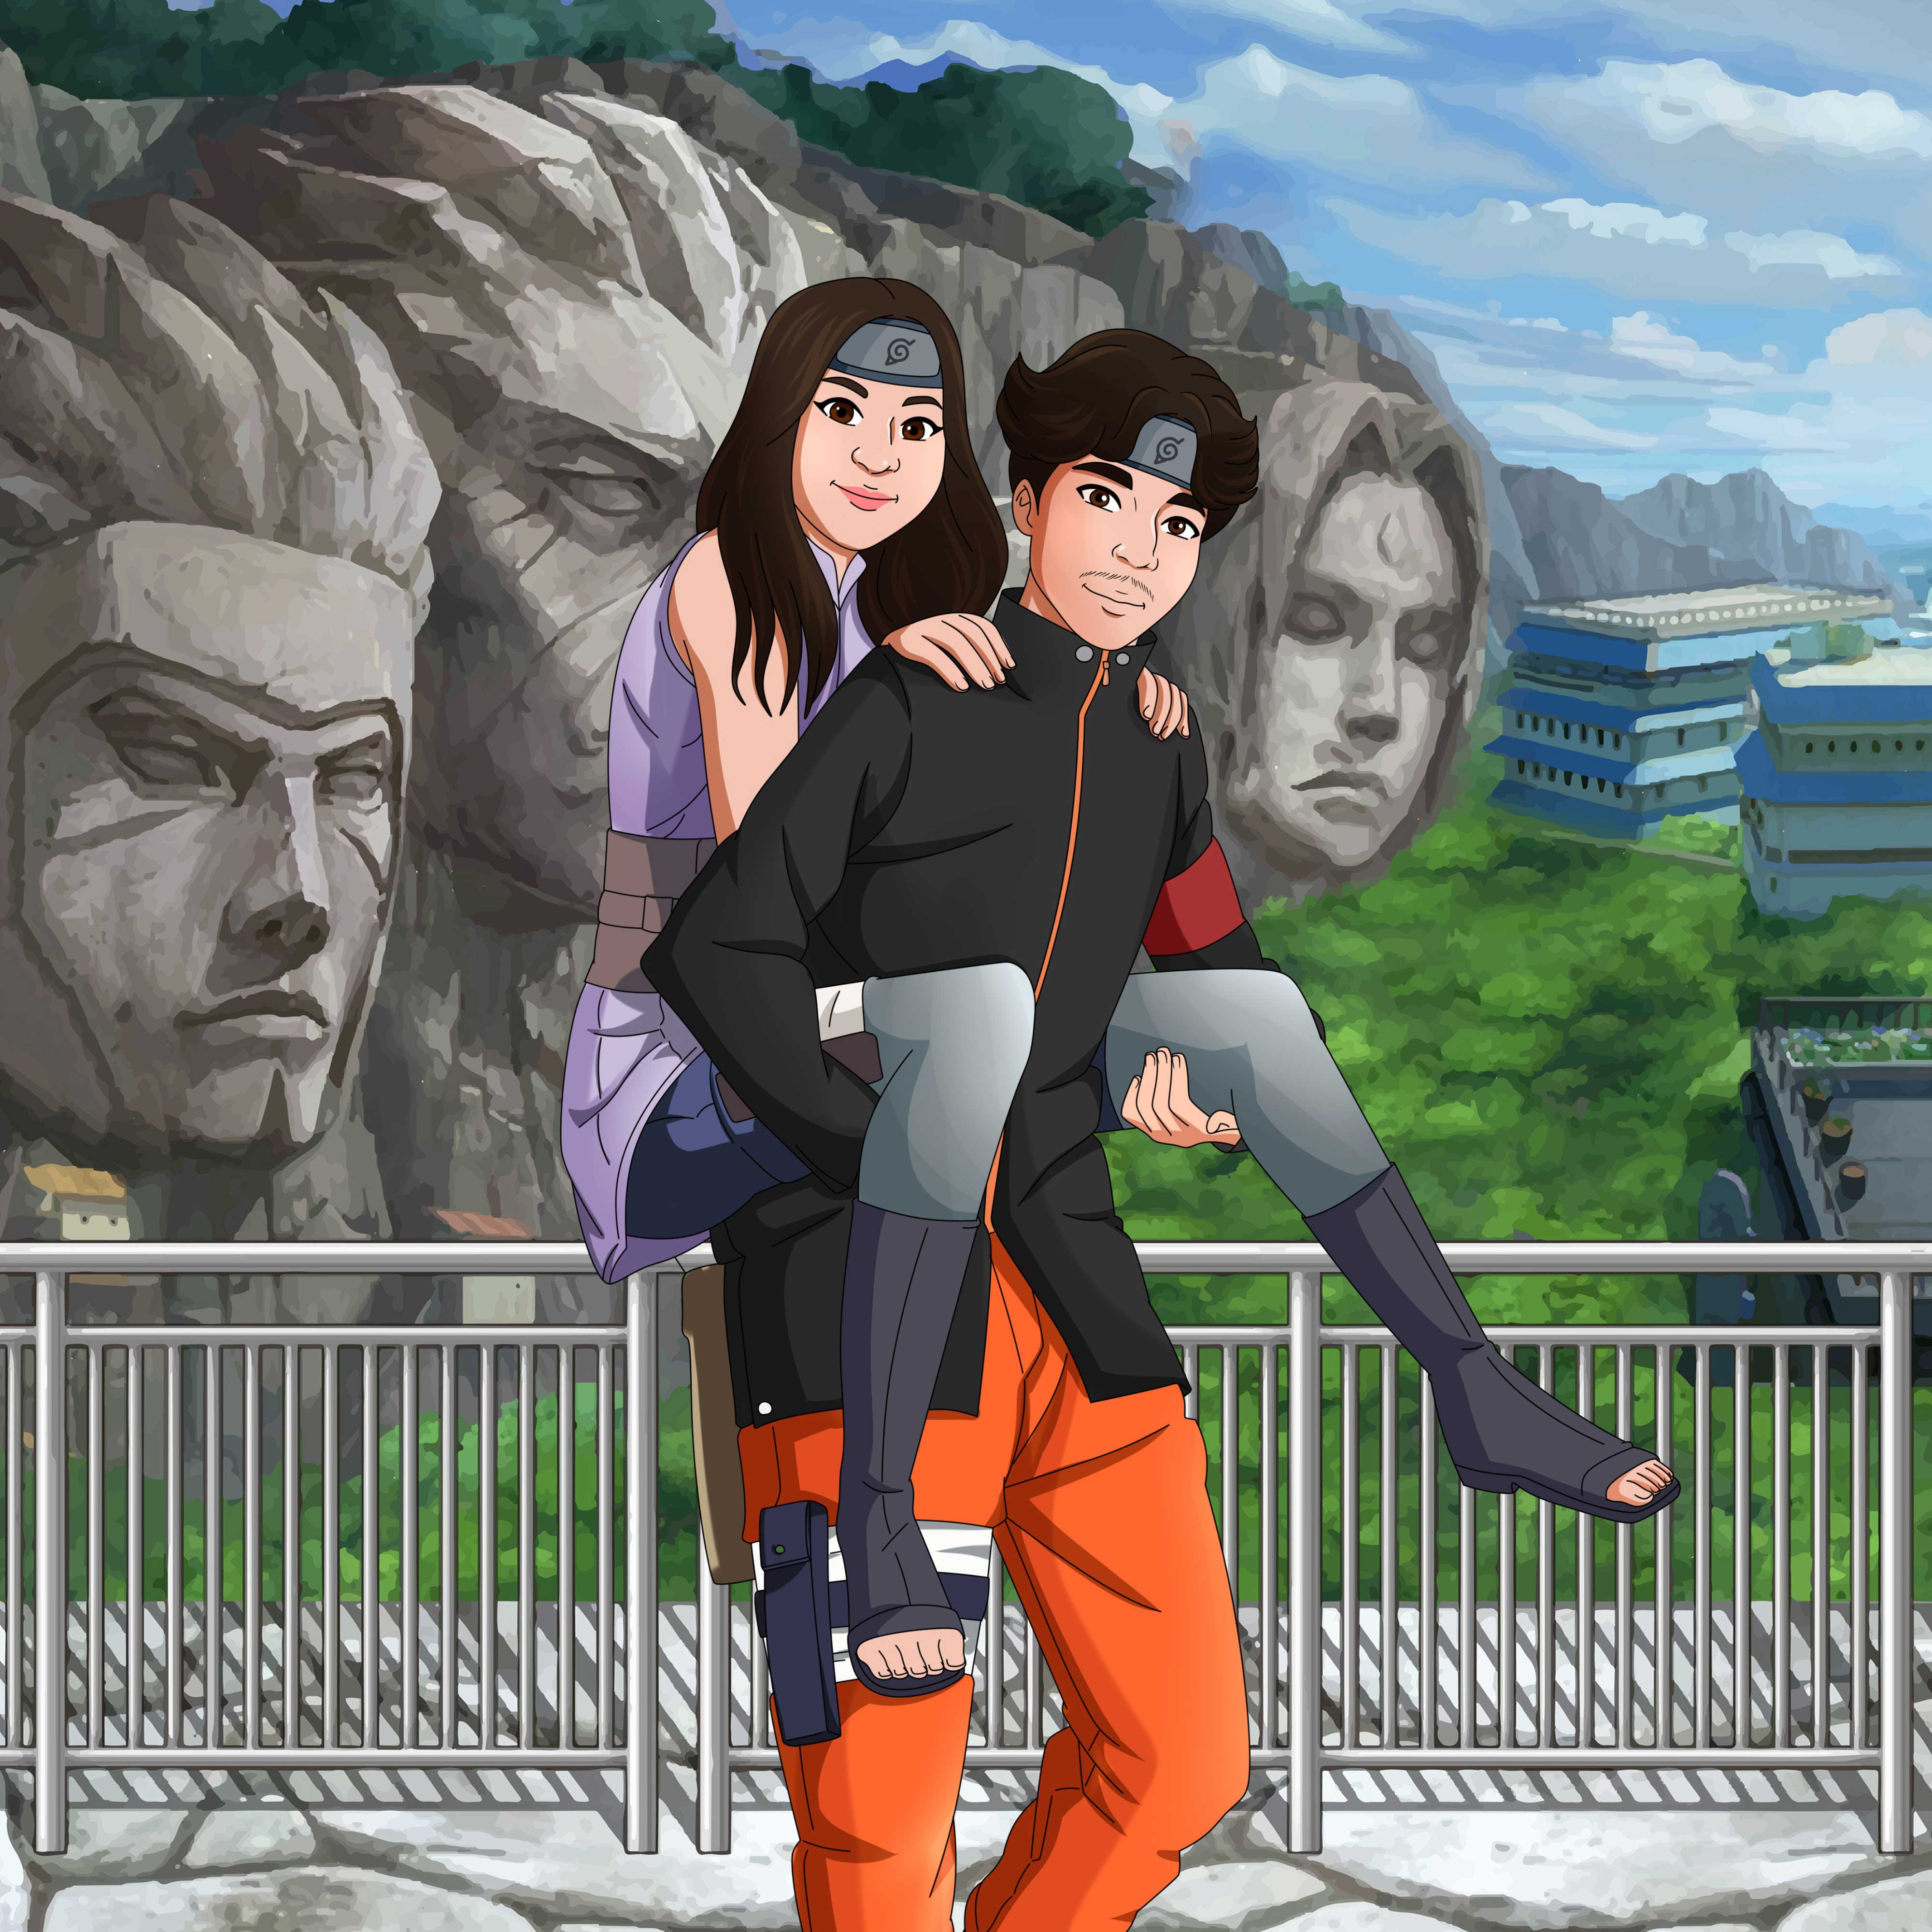 Personalized Naruto Custom Portrait - Capture Your Ninja Story in Anime Artistry